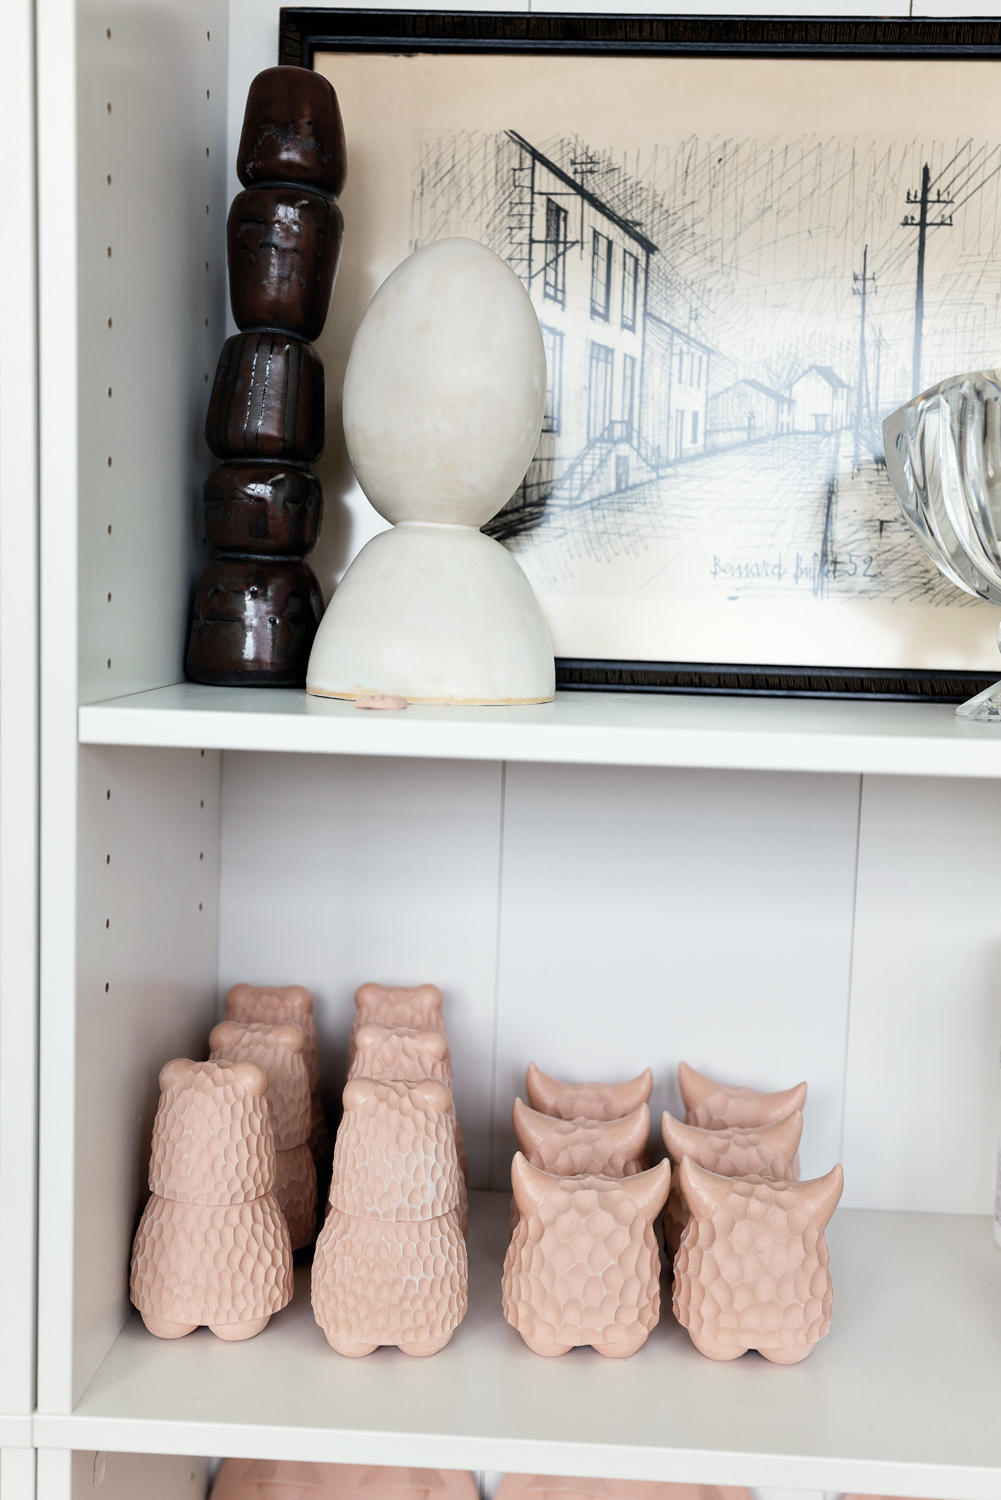 Shelves lined with pottery pieces and artwork